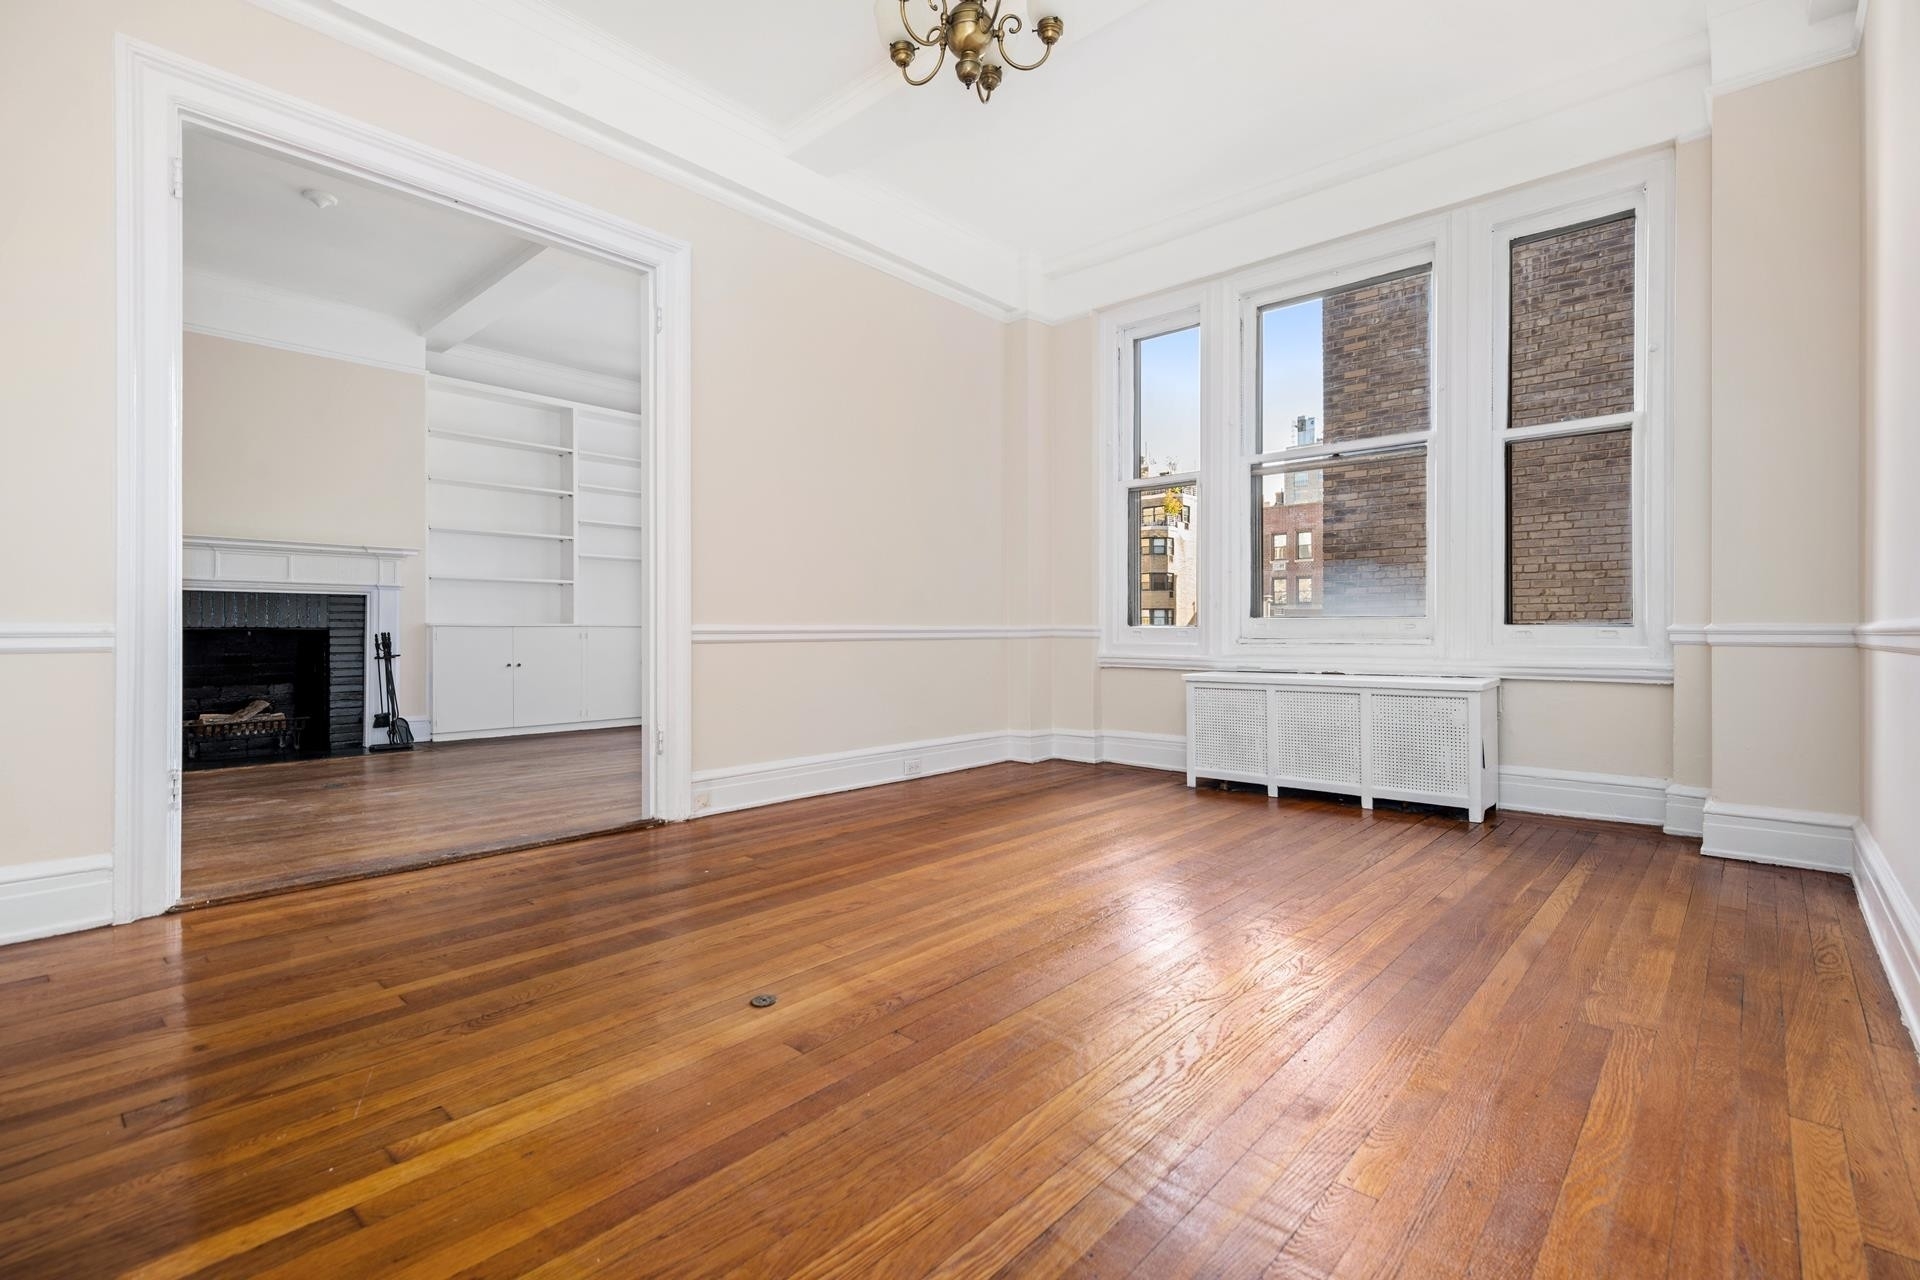 4. Co-op Properties for Sale at East 82 Corporation, 108 E 82ND ST, 7C Upper East Side, New York, NY 10028